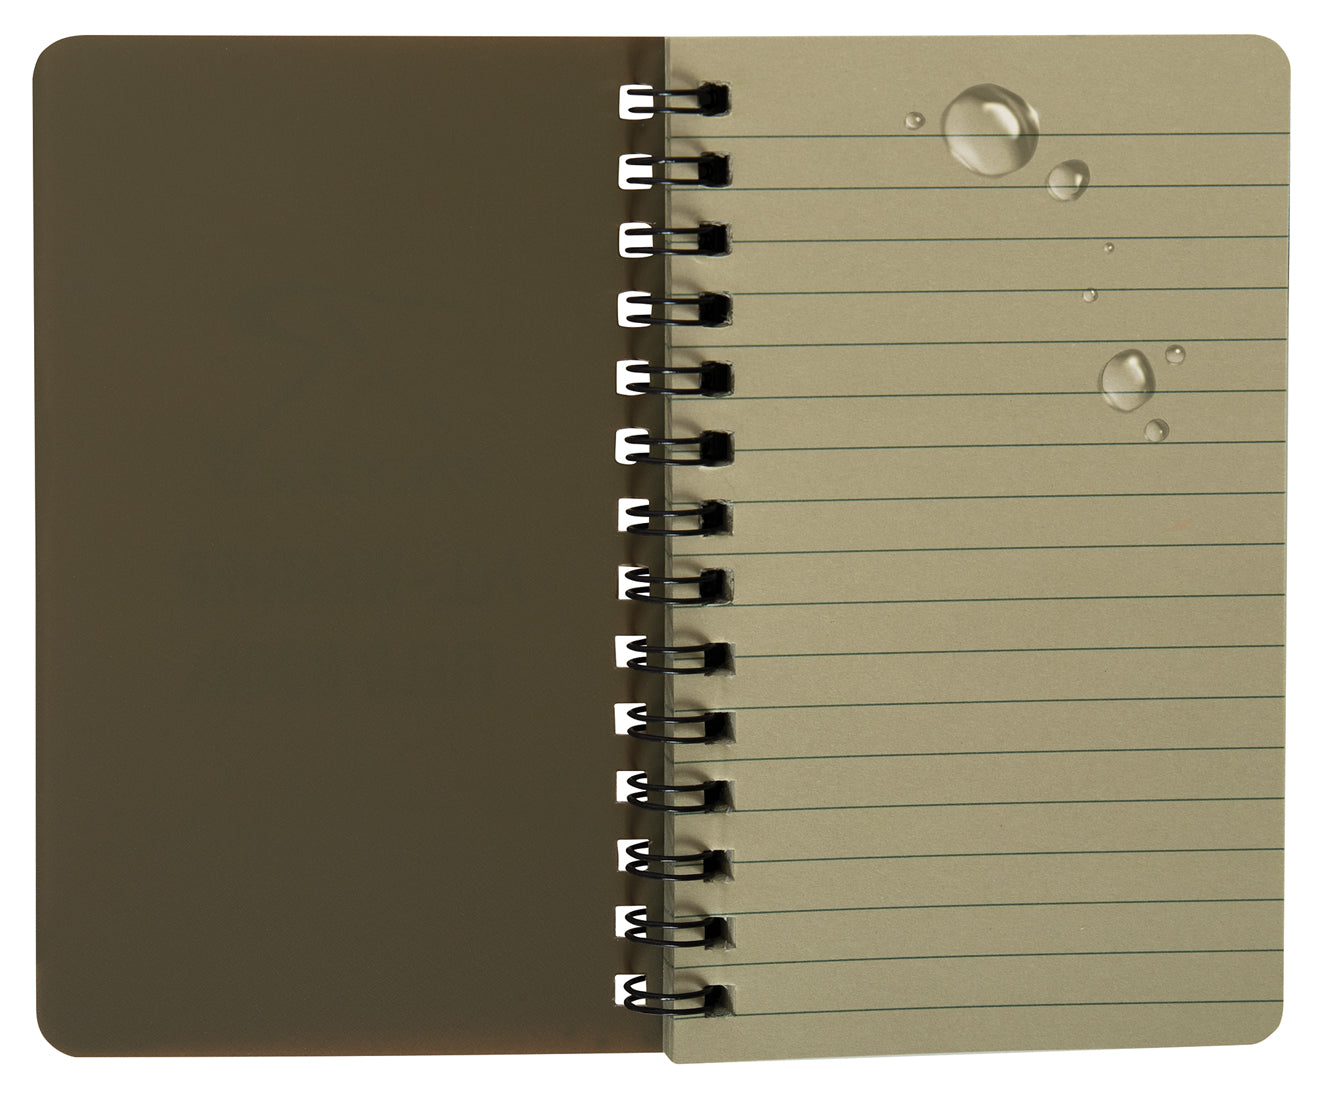 Rothco All-Weather Waterproof Notebook